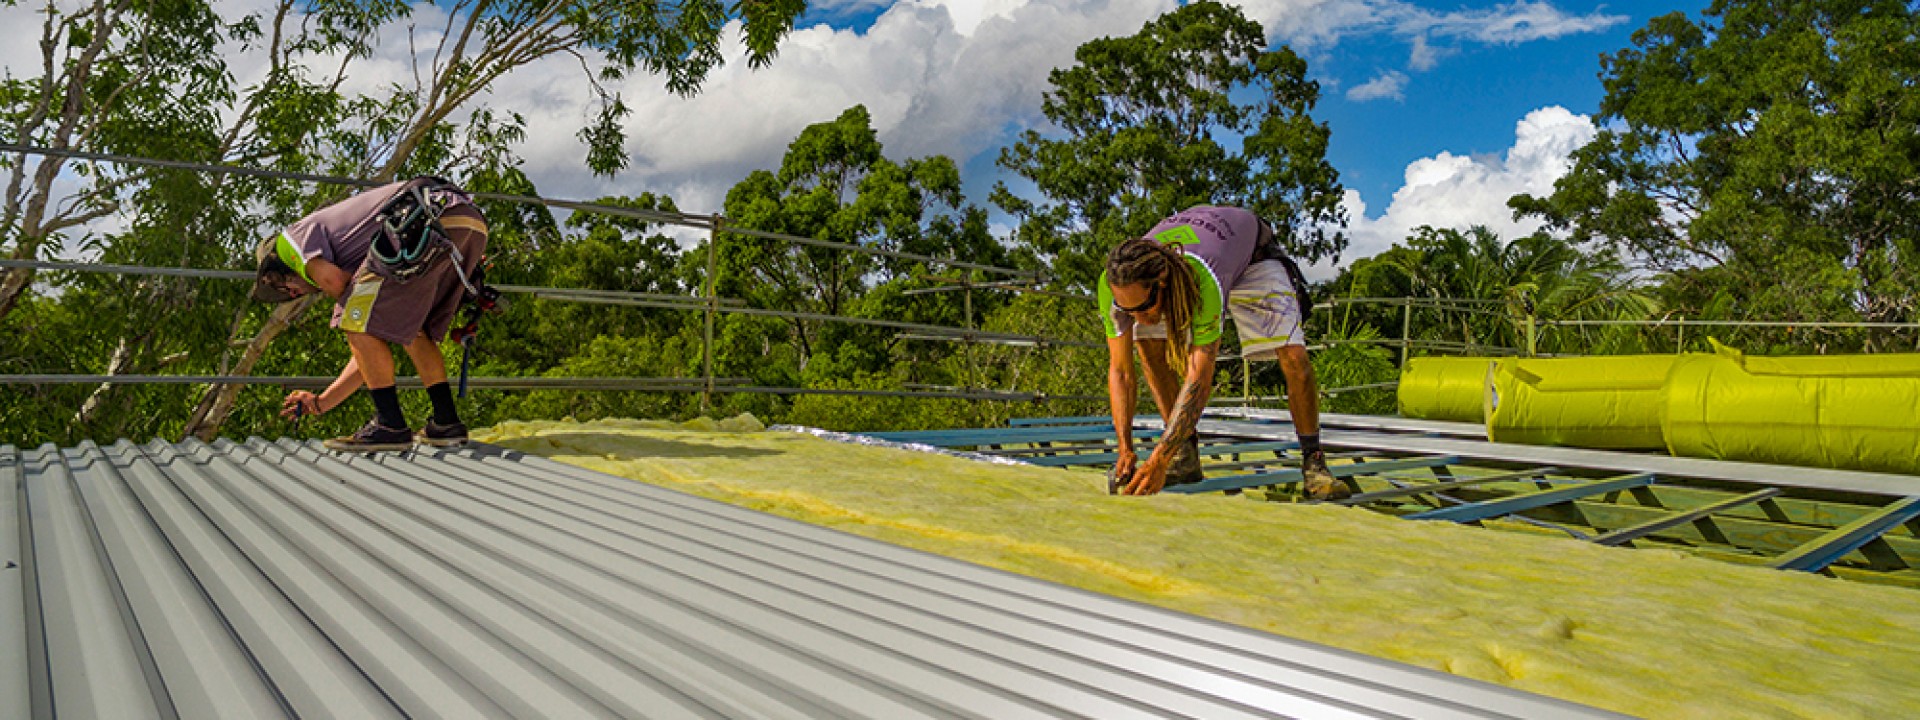 Asbestos Roof Replacements